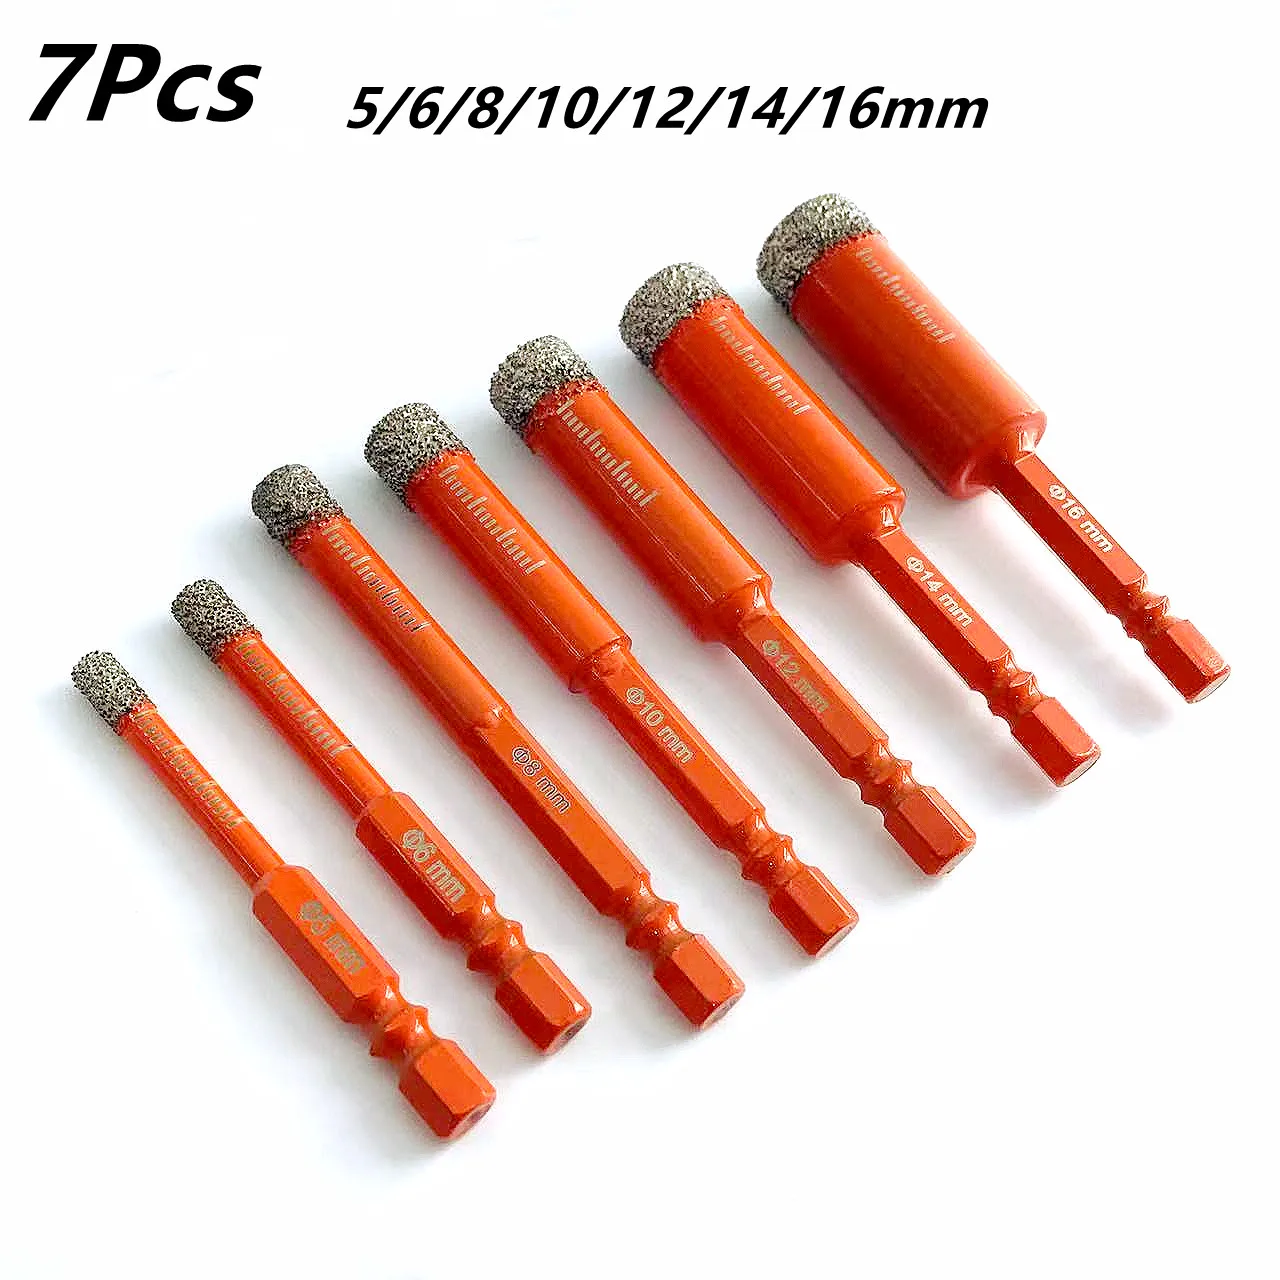 Dry Diamond Drill Bits Set for Granite Ceramic Marble Tile Stone Glass Hard Material Hex Shank Masonry Hole Saw Drill Bit 5-16mm shdiatool free shipping drilling core bit hole saw opener cup crown m14 thread tile cutter masonry granite marble stone ceramic